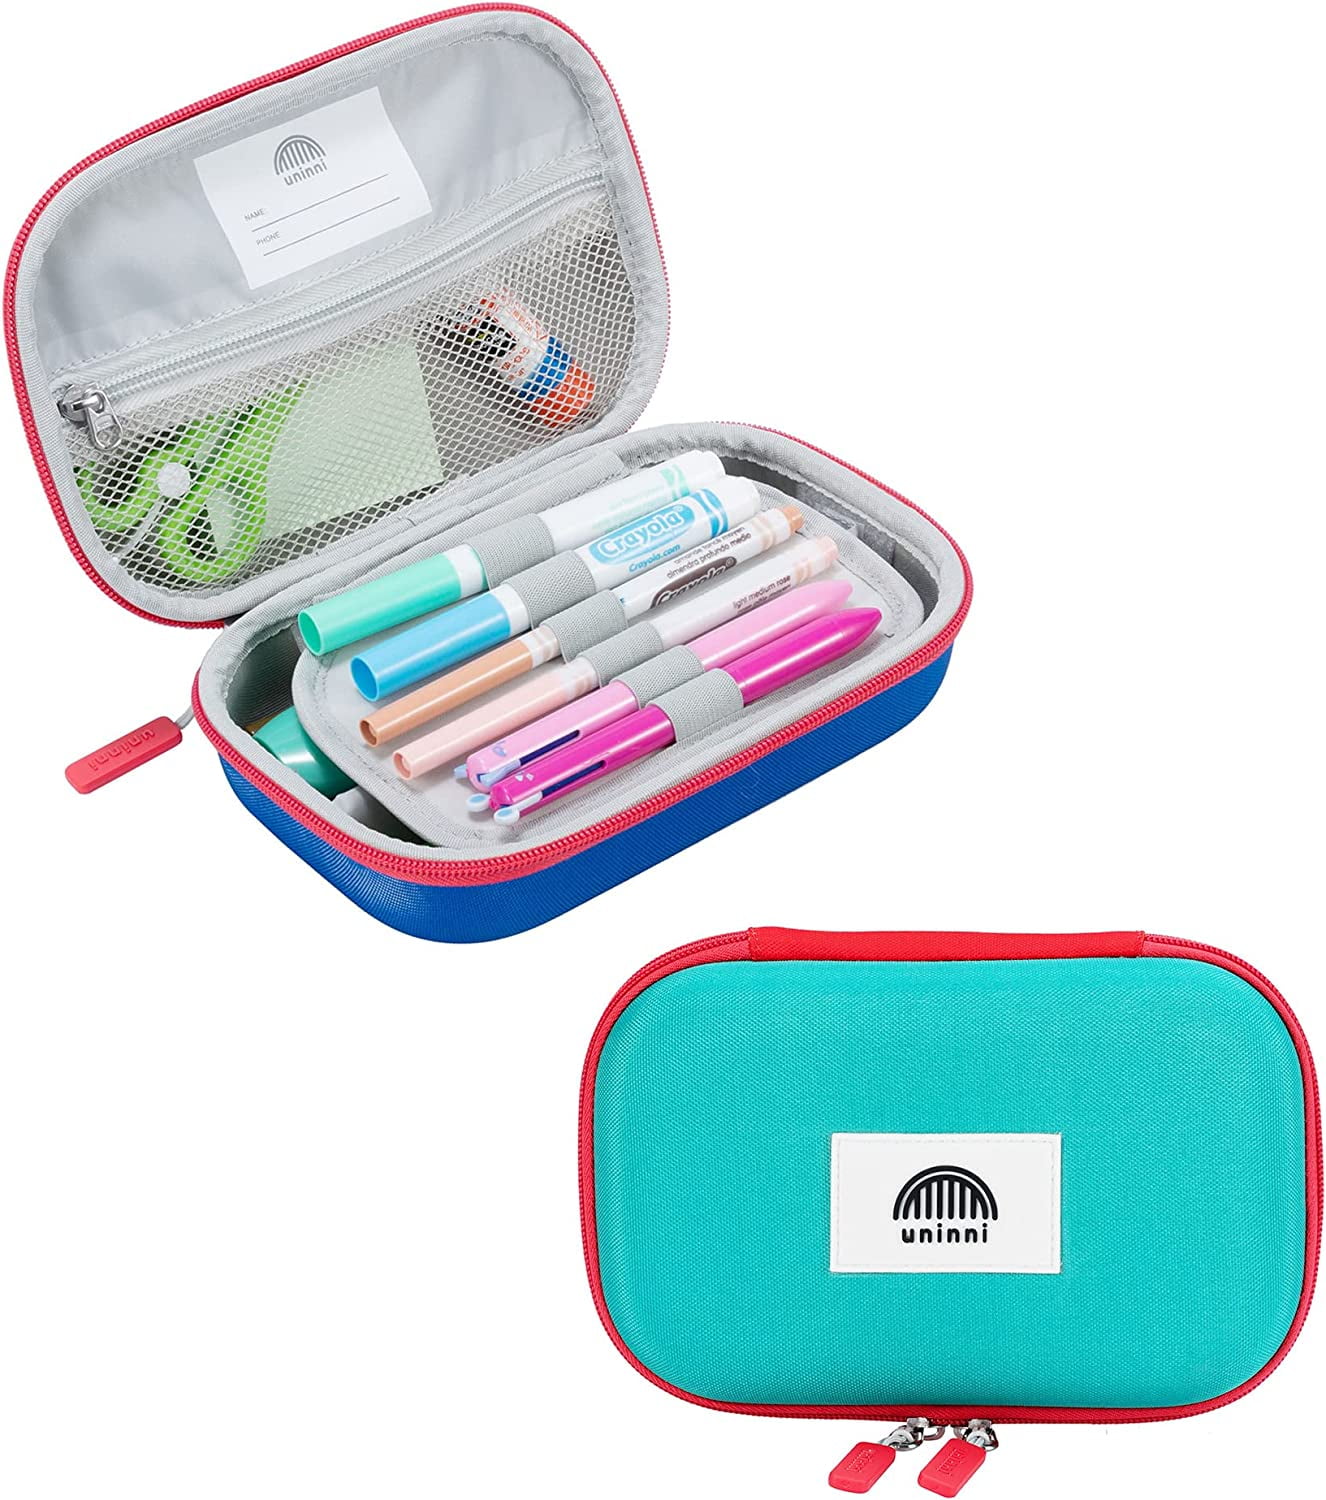 Uninni Kids Pencil Case for Boys and Girls with High-Capacity Storage - Golf